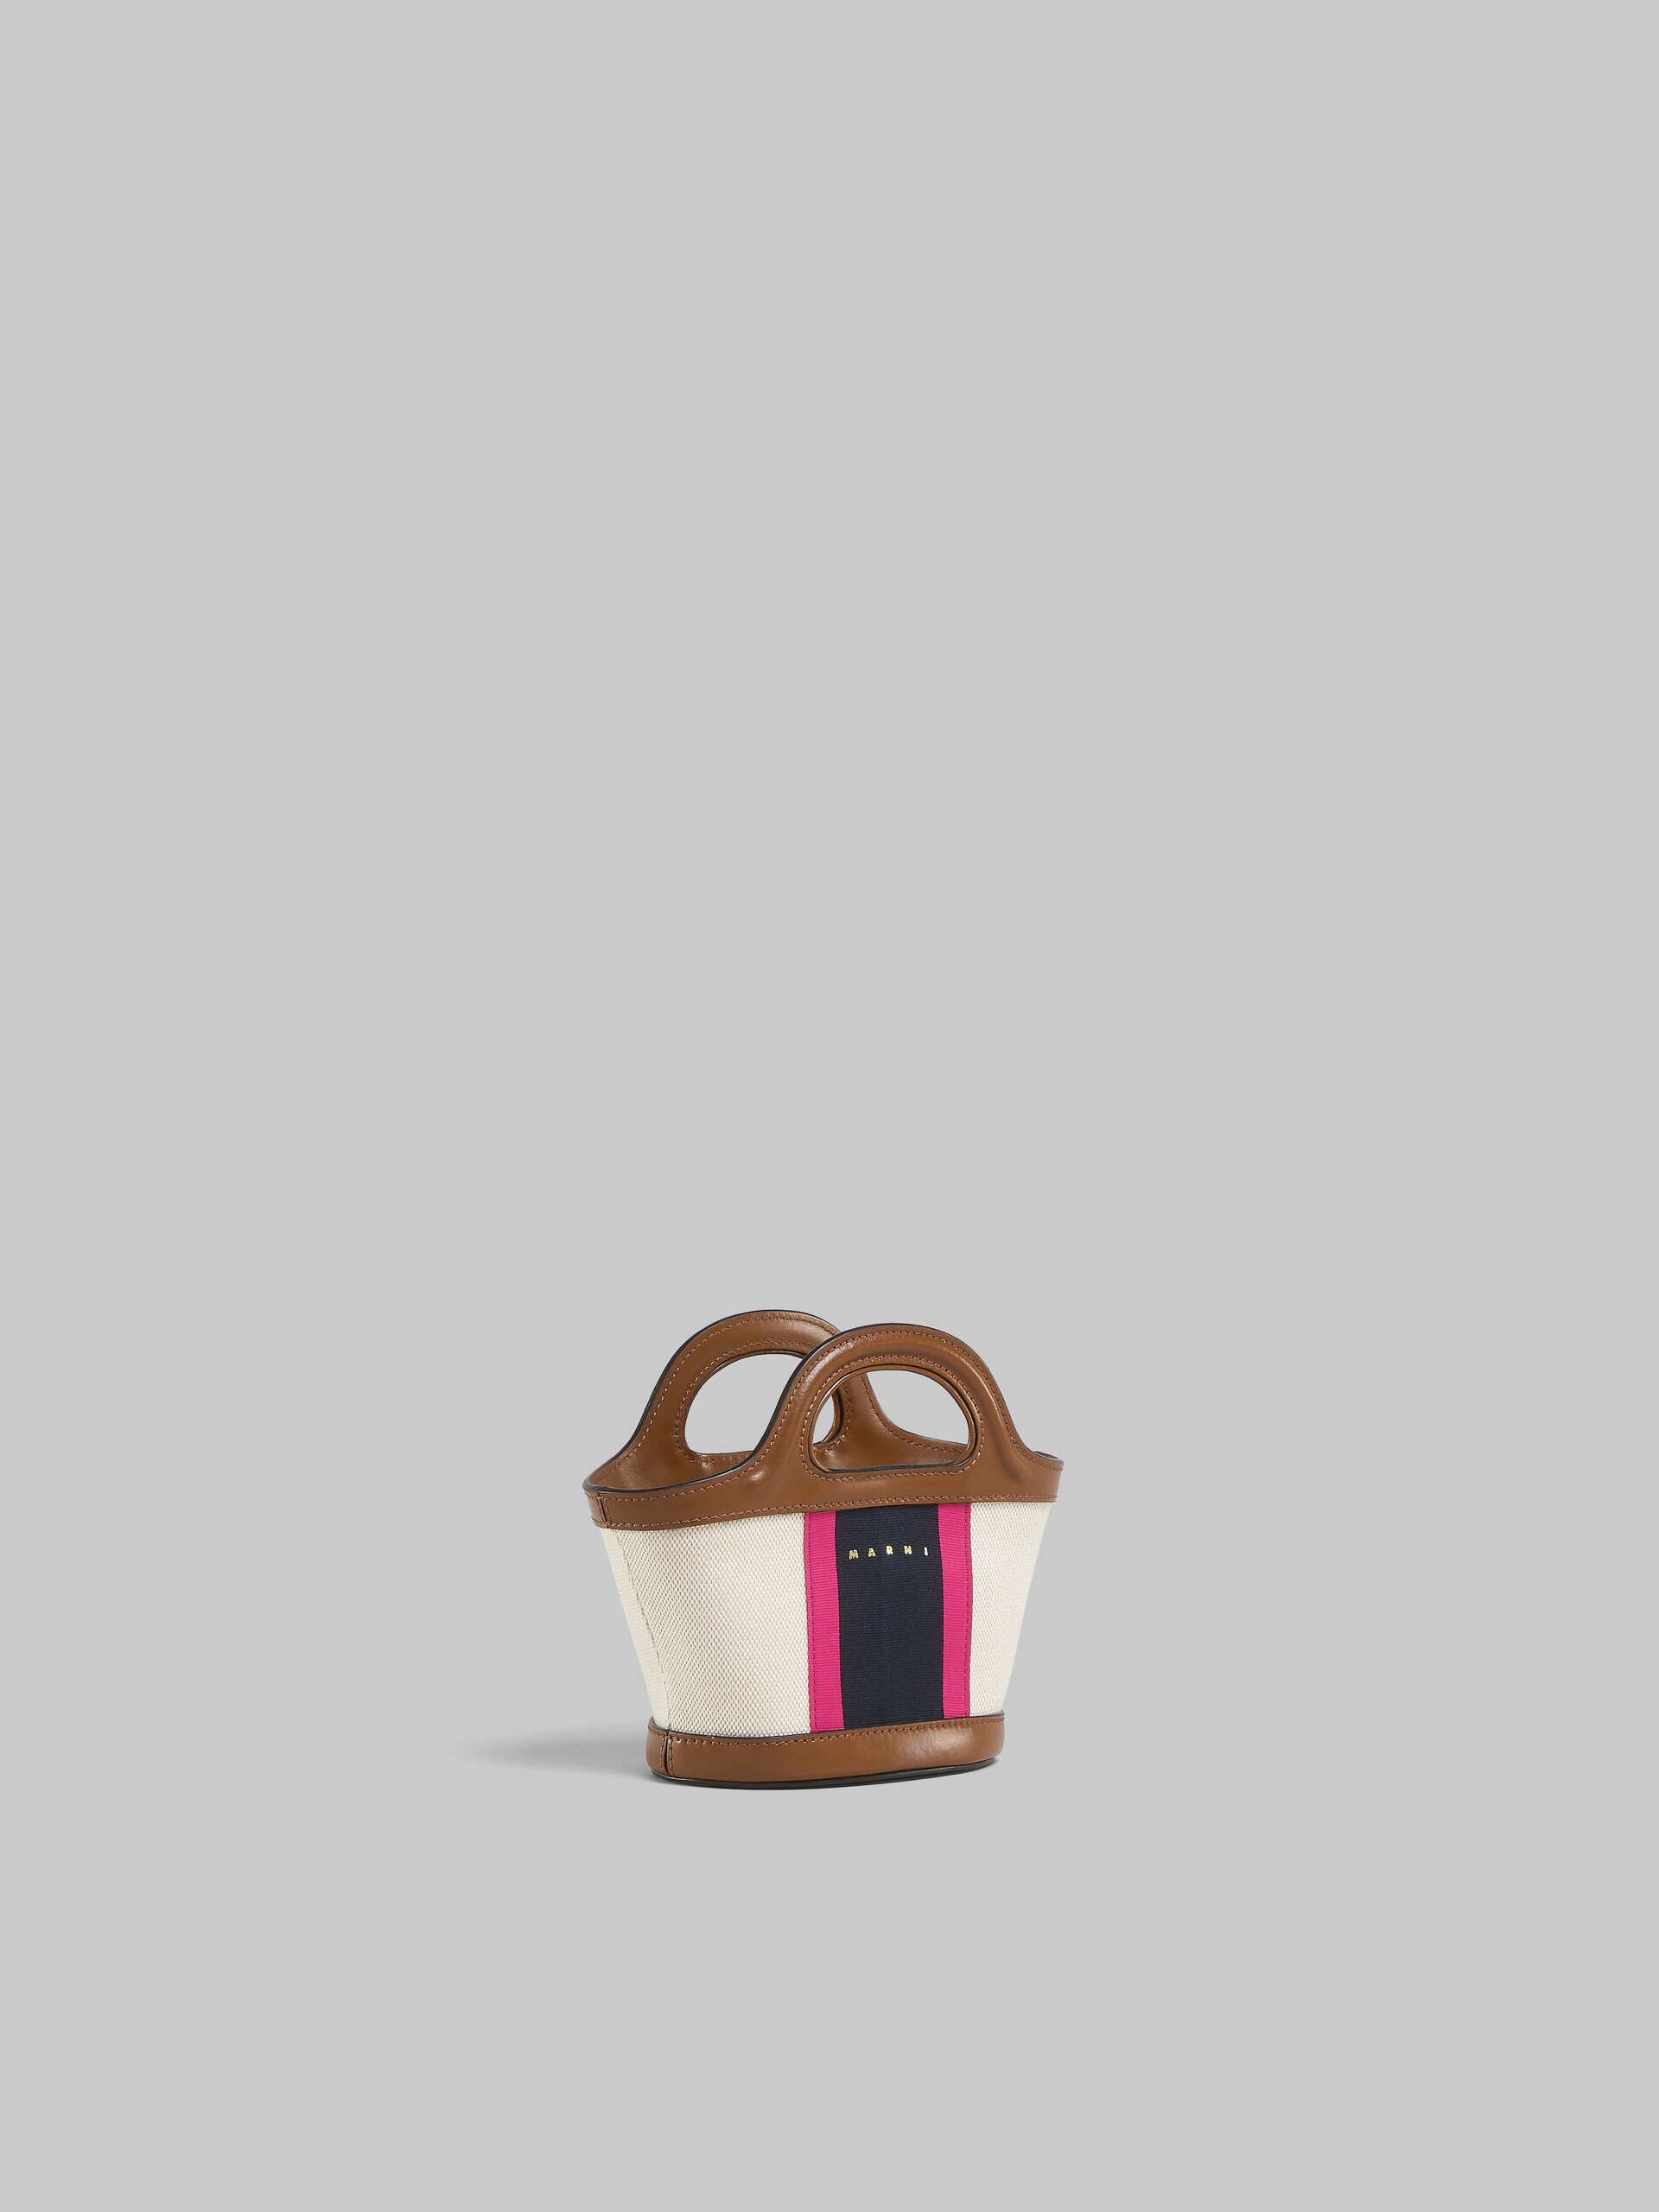 Tropicalia Micro Bag in Brown leather and striped canvas - Handbags - Image 6